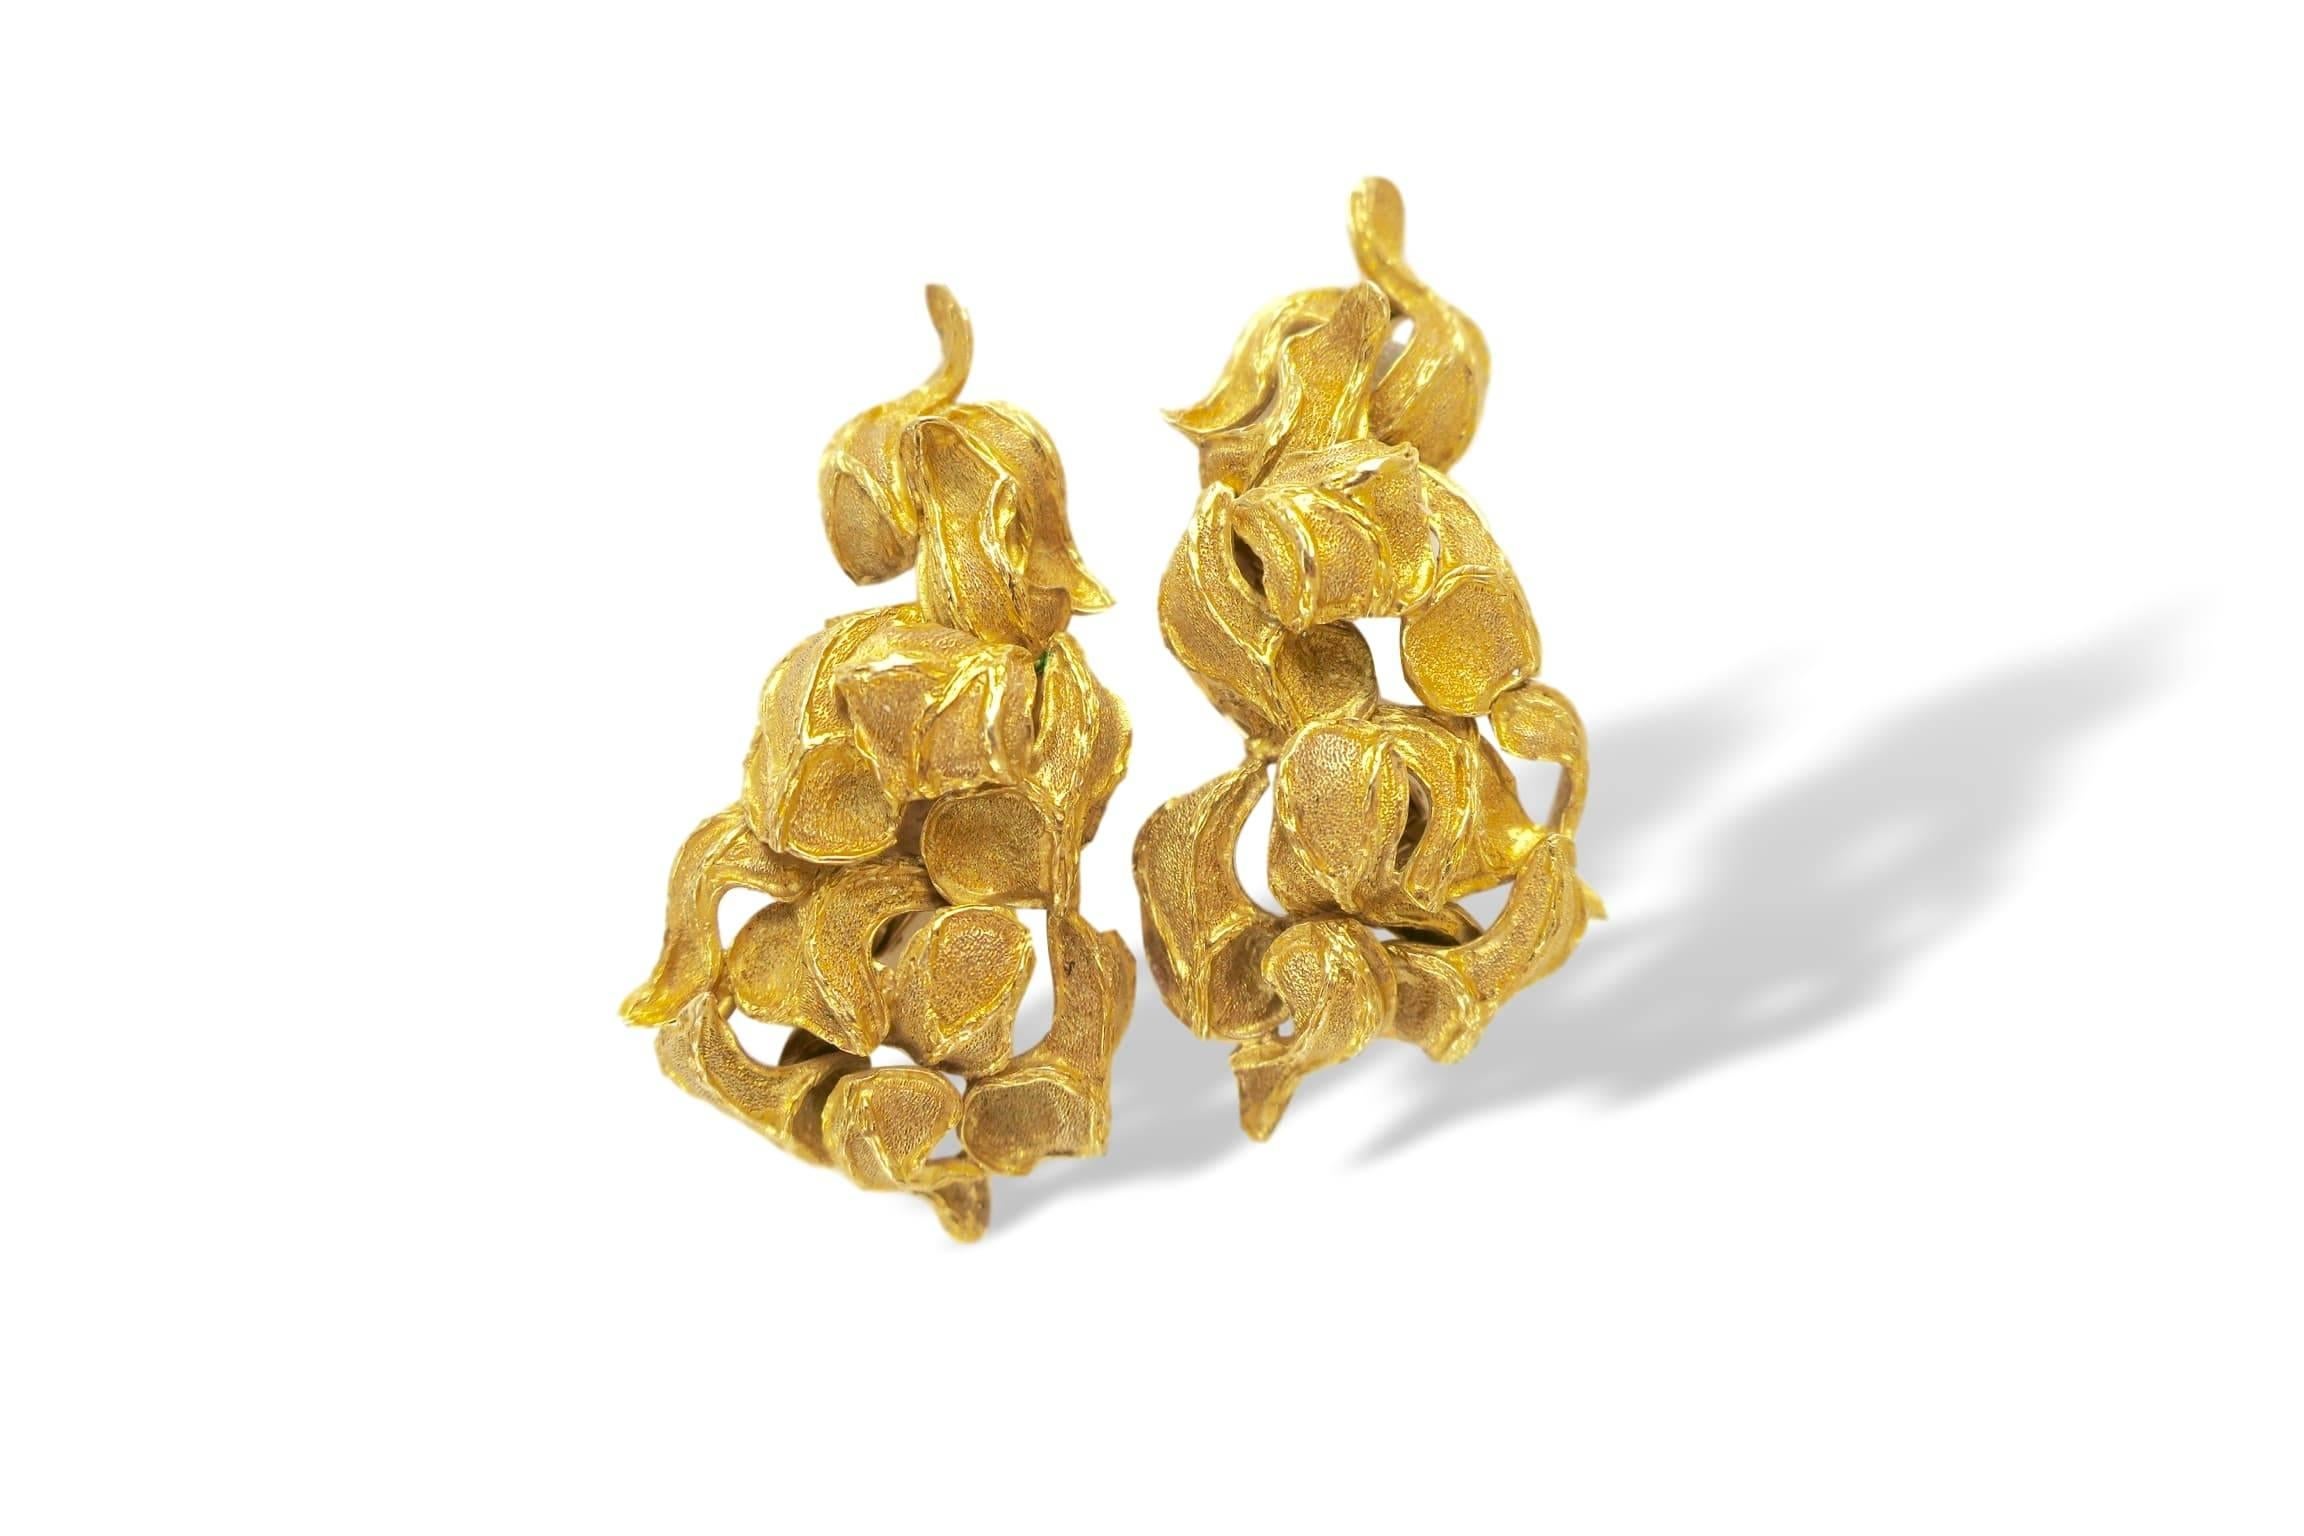 Textured 18k yellow gold earclips. The 2" 18k yellow gold foliate earrings with textured matte finished leaves. These rich colored yellow gold earrings, designed for the left ant right ear, sit comfortably on the lobe and hug the shape of the